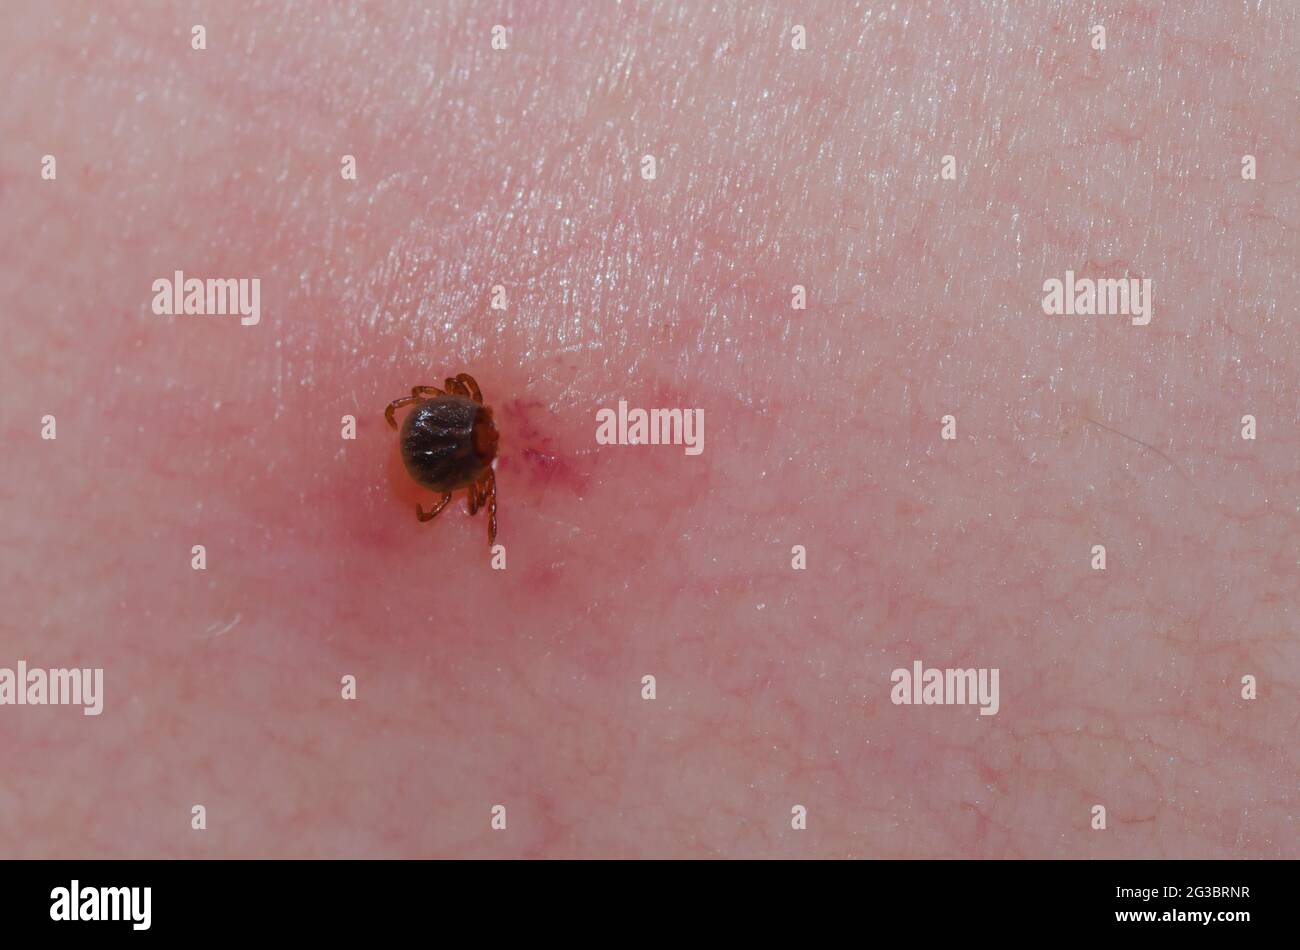 Lone Star Tick, Amblyomma americanum, nymph attached to human skin Stock Photo